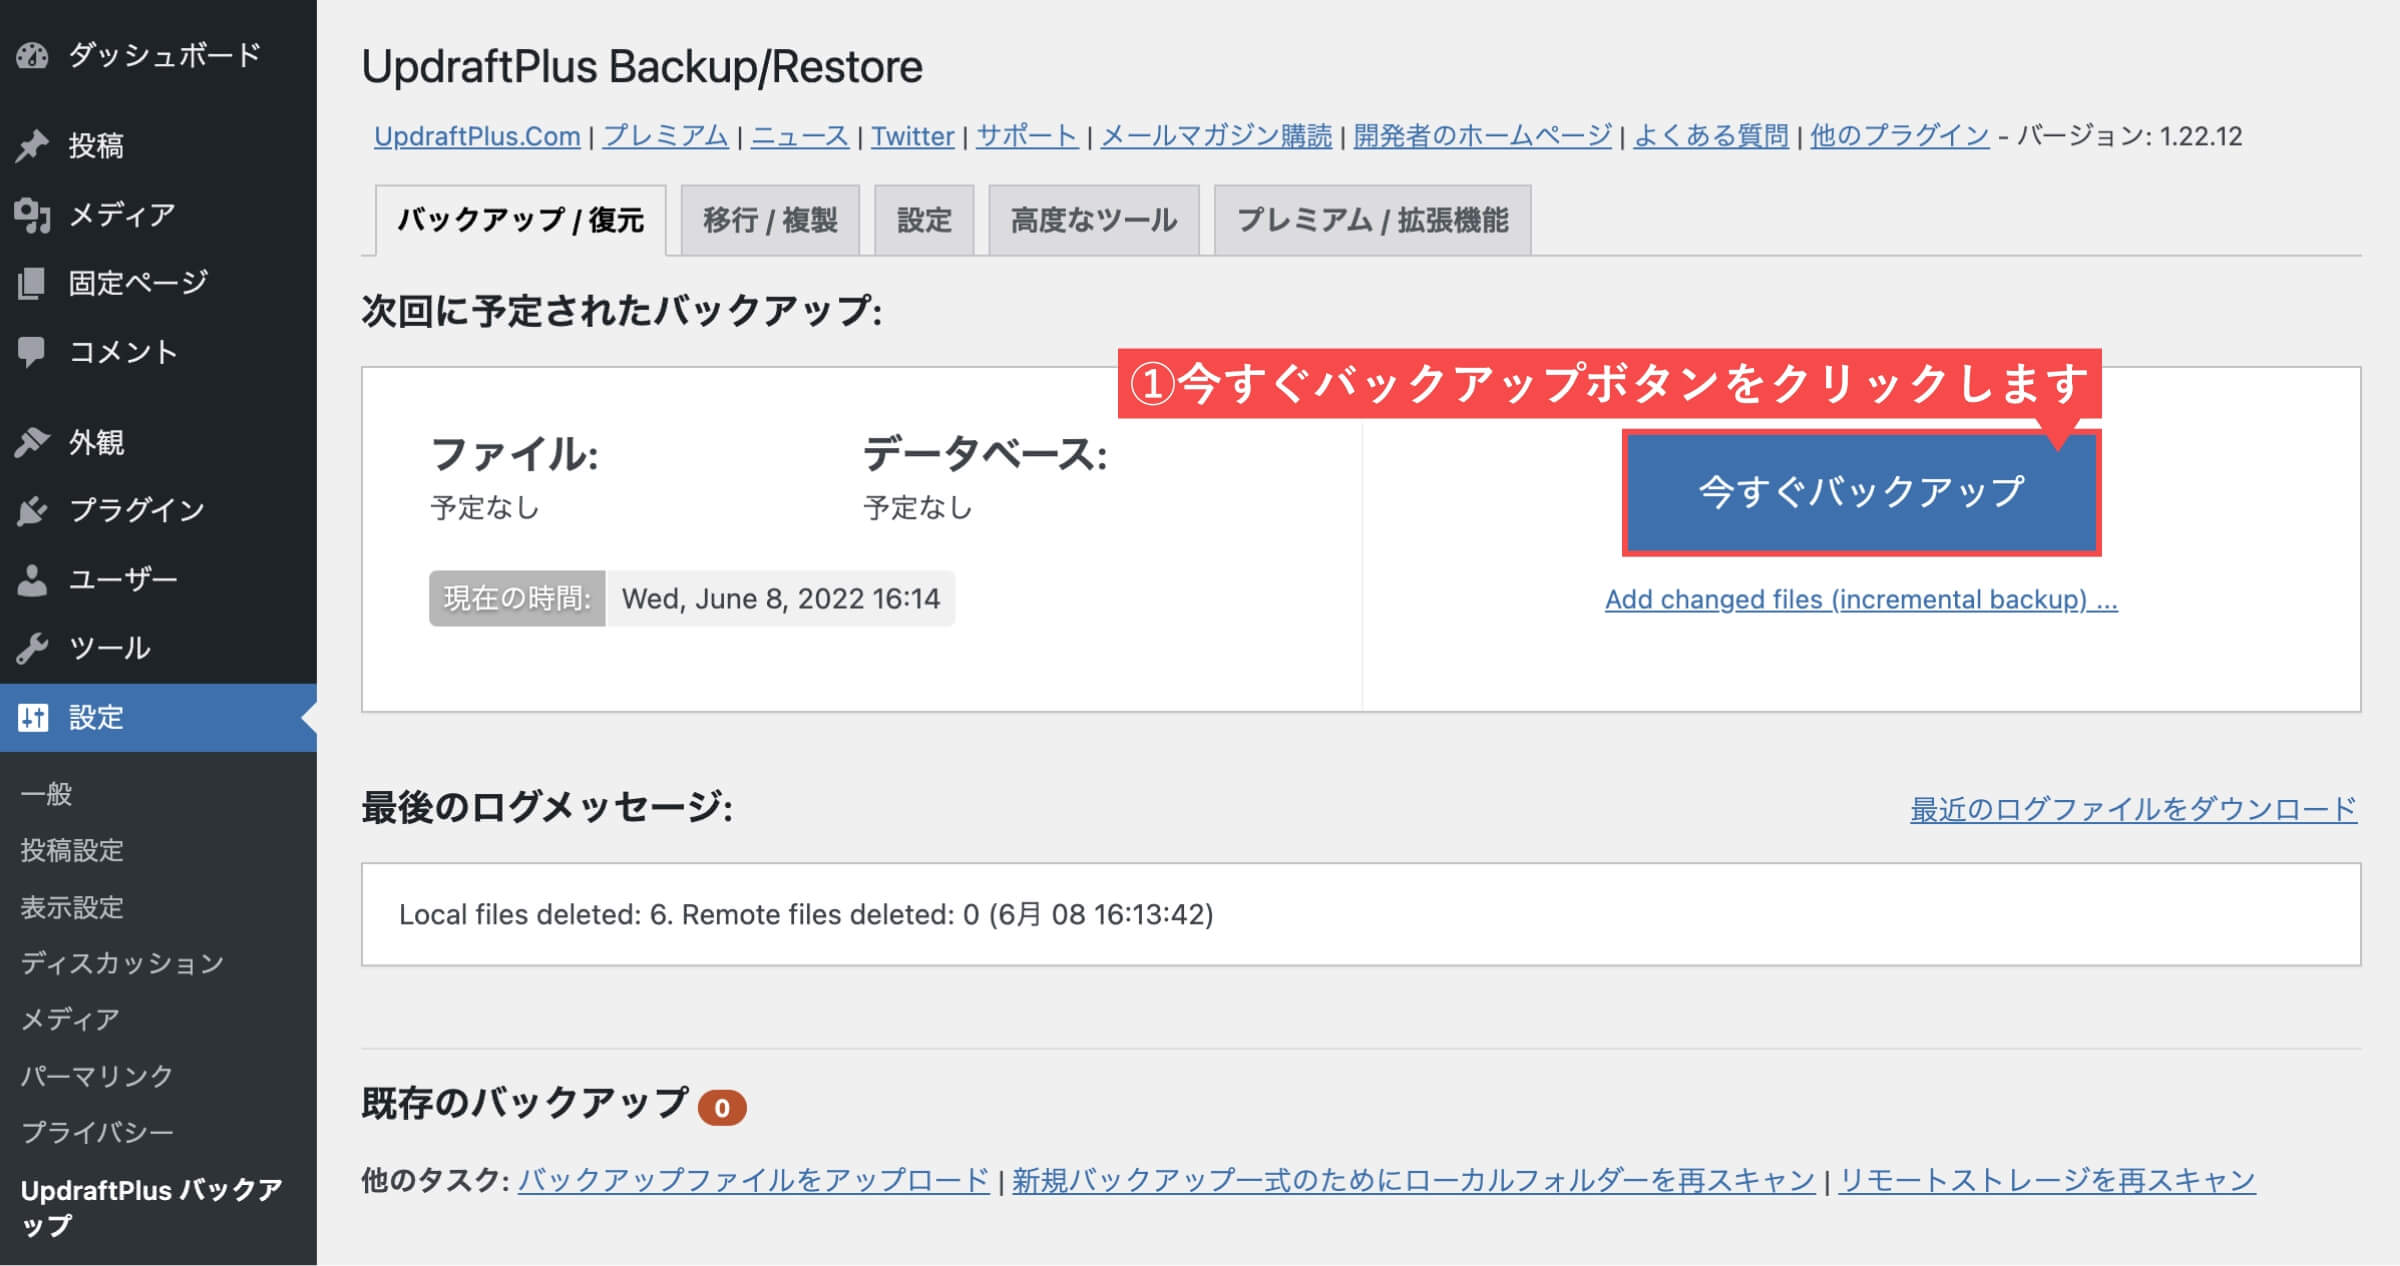 UpdraftPlus Backup/Restore画面（今すぐバックアップ）